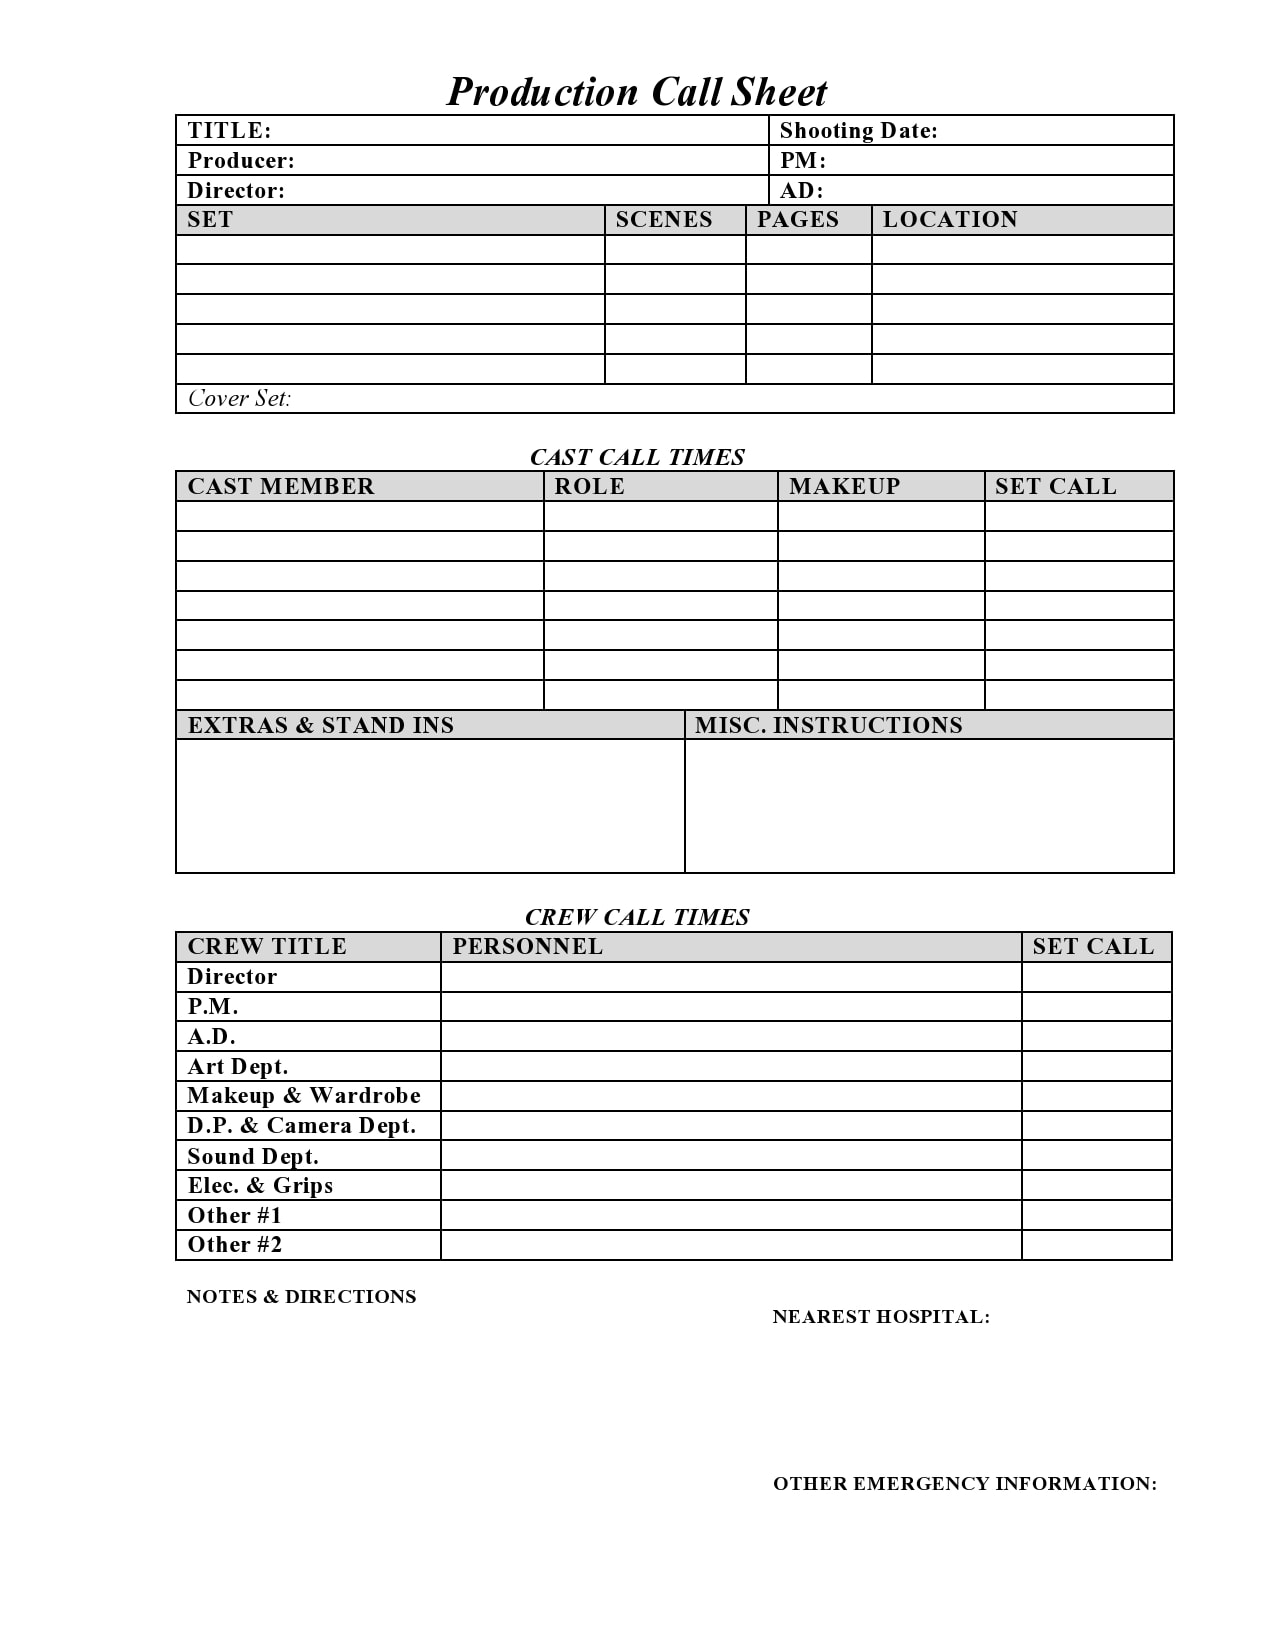 20 Simple Call Sheet Templates (FREE) - TemplateArchive Throughout Film Call Sheet Template Word